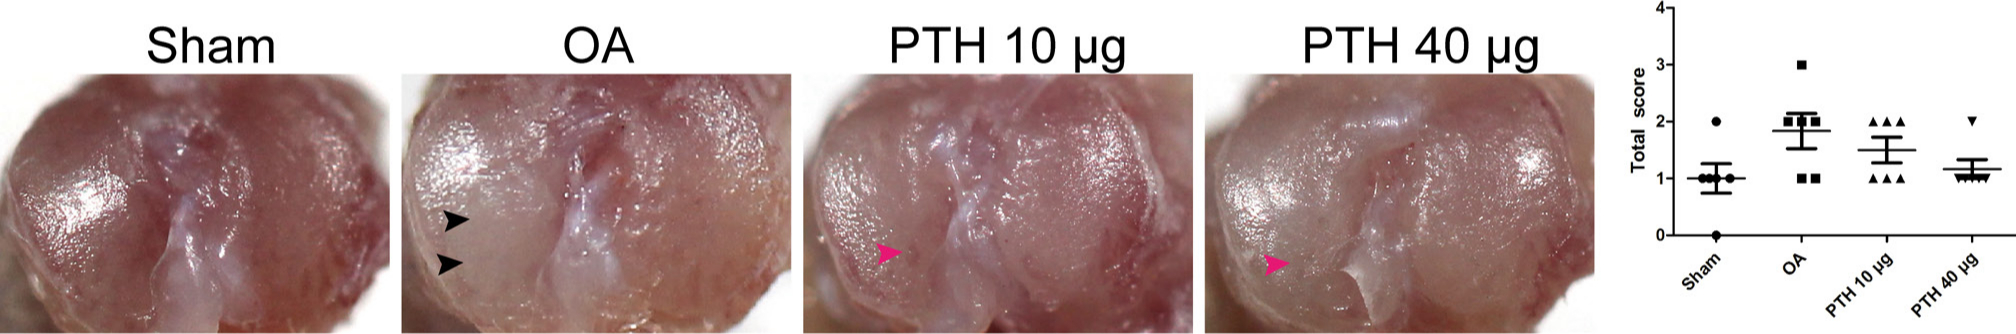 Fig. 1 
            Outline of the tibial plateau of samples and macroscopic scoring between groups. Black arrows indicate fibrillation of the tibial plateau, and pink arrows indicate surface roughening. Data are presented as the mean (SD), p-values measured using Mann-Whitney U test. OA, osteoarthritis; PTH, parathyroid hormone.
          